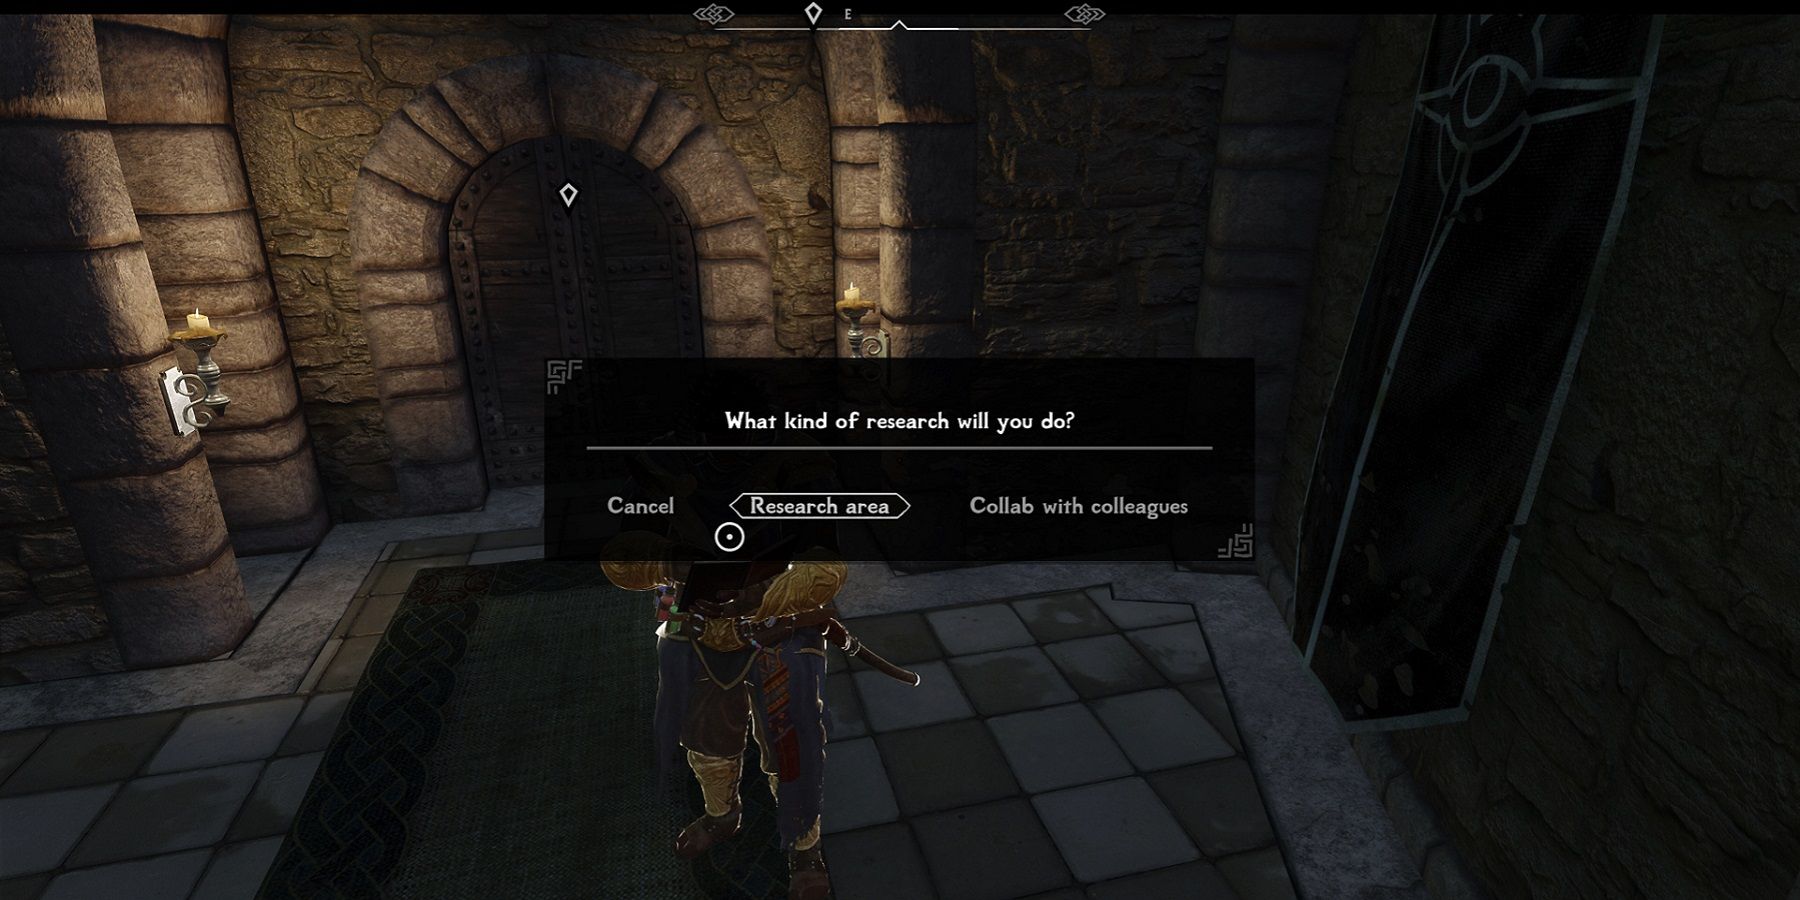 Image from a Skyrim mod showing the player doing some research.